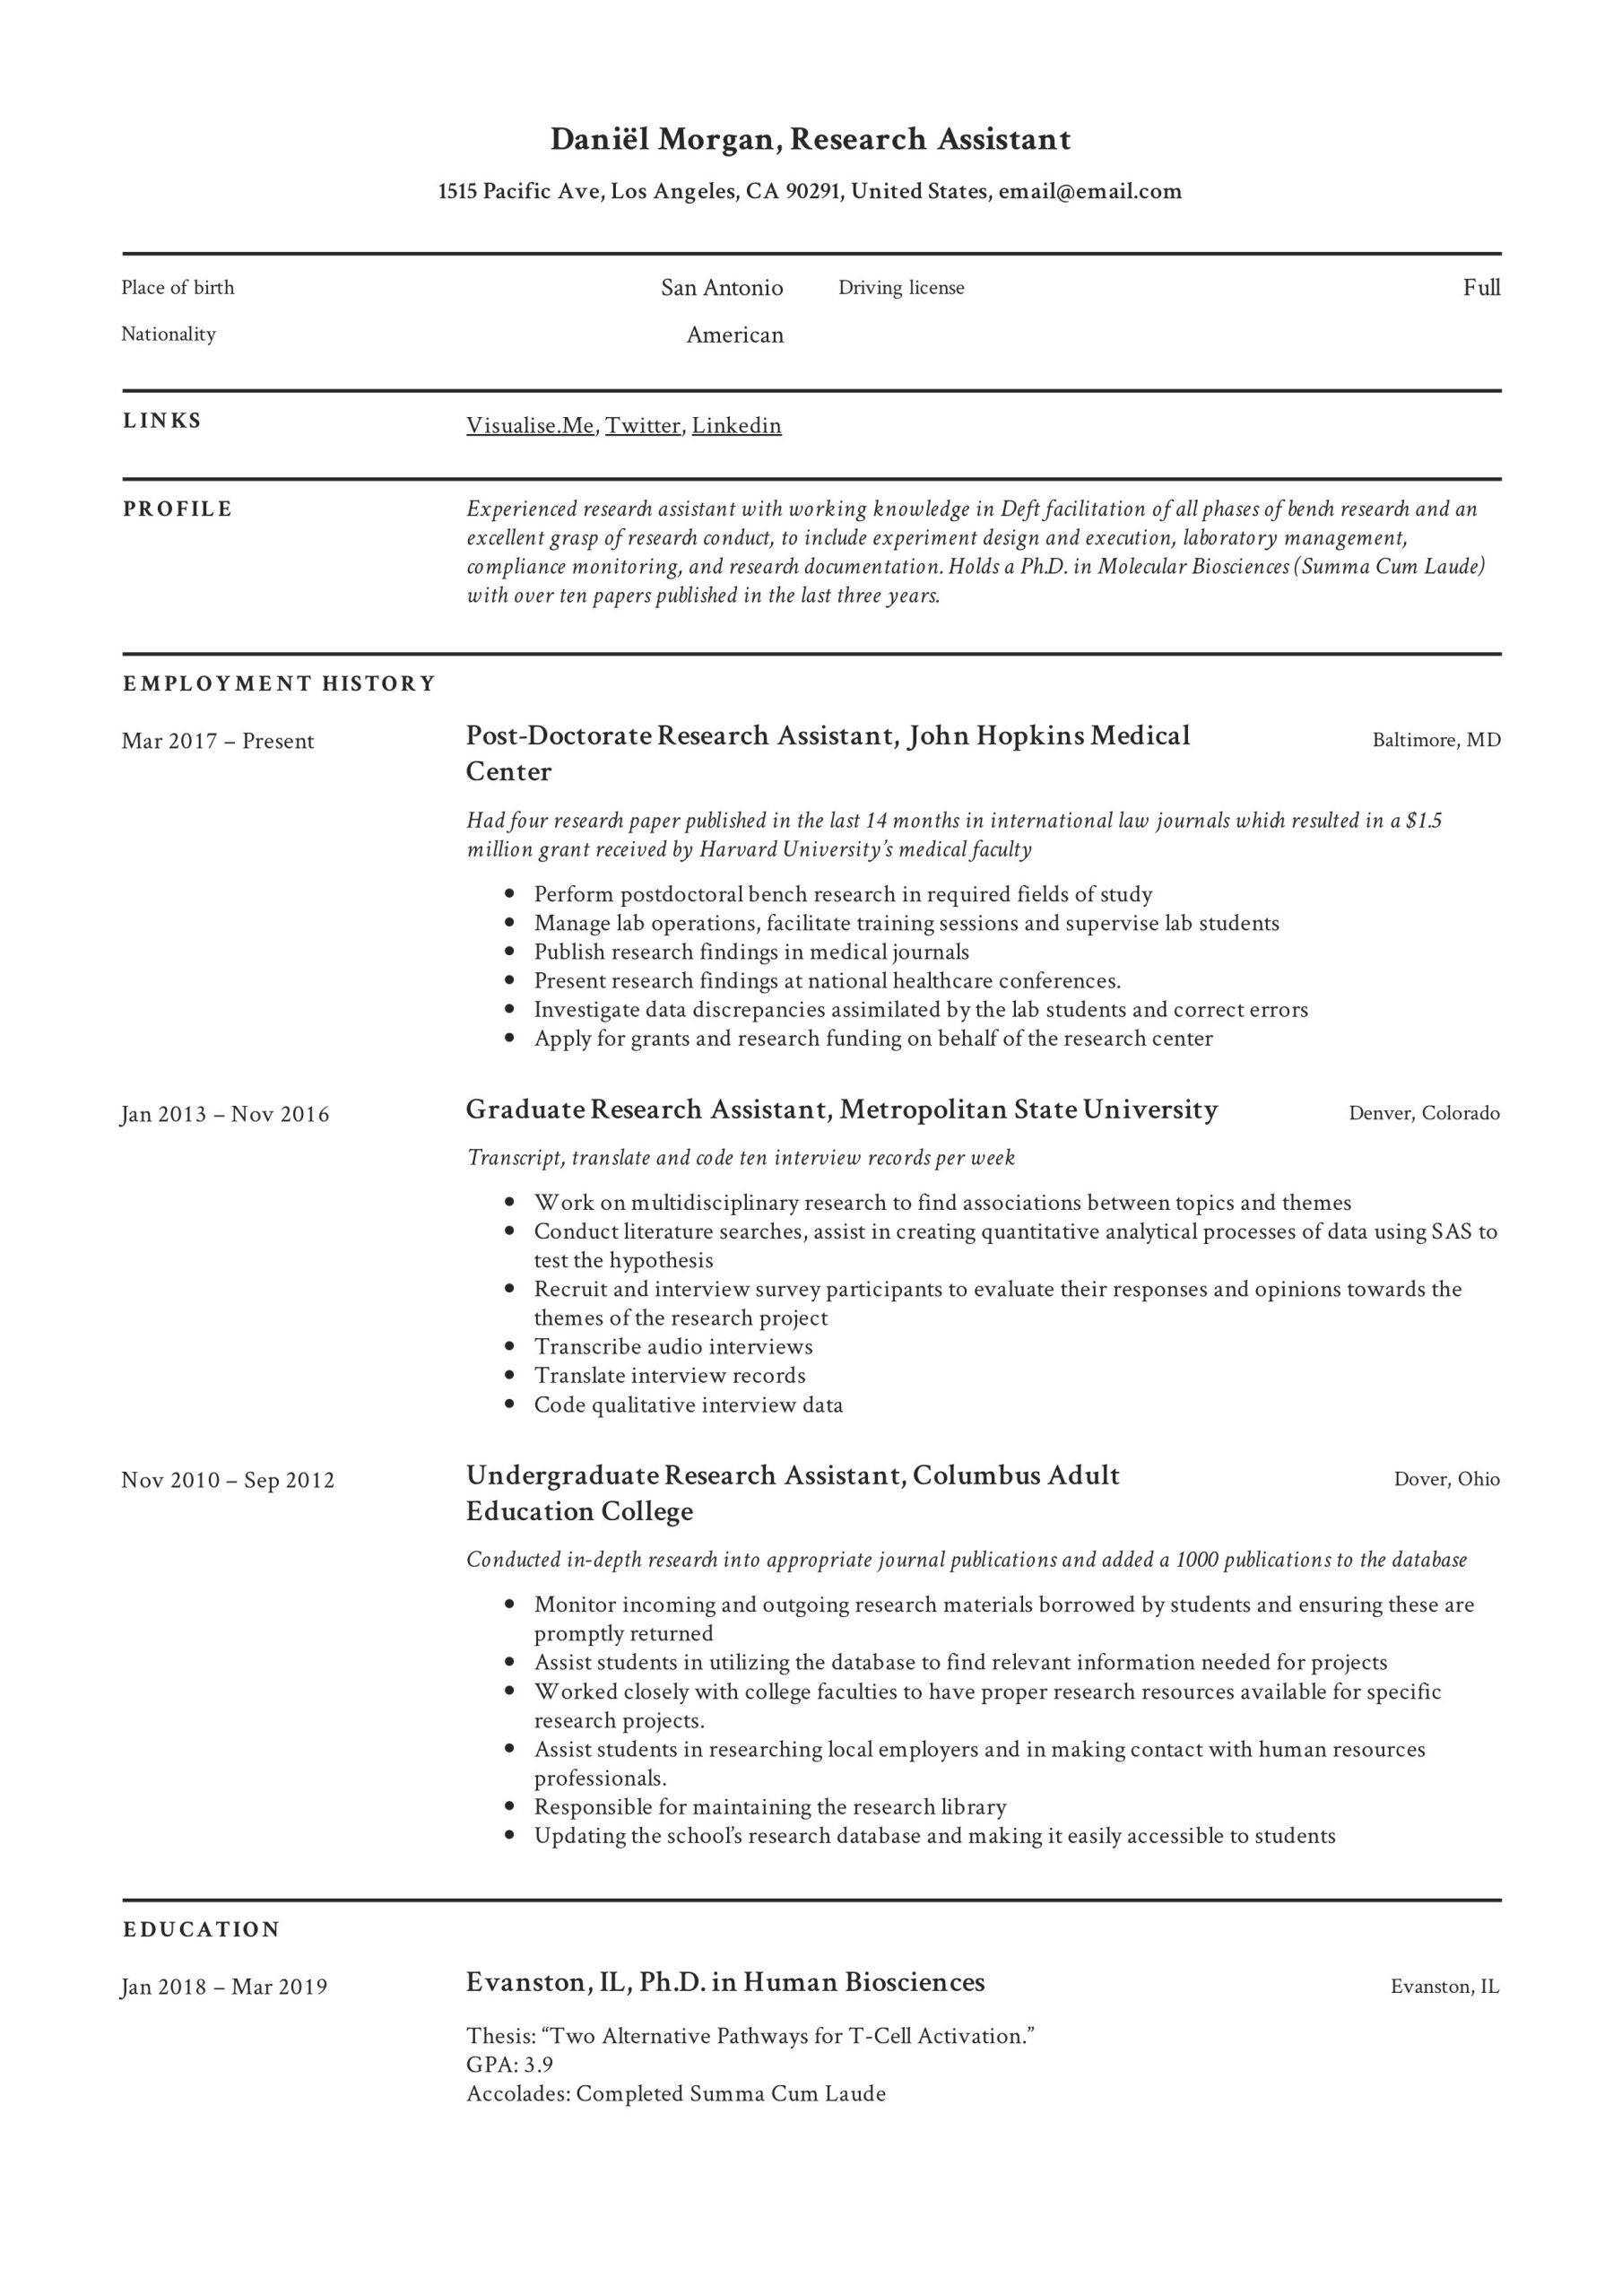 Sample Resume for Lab Research assitant Research assistant Resume & Writing Guide  12 Resume Examples